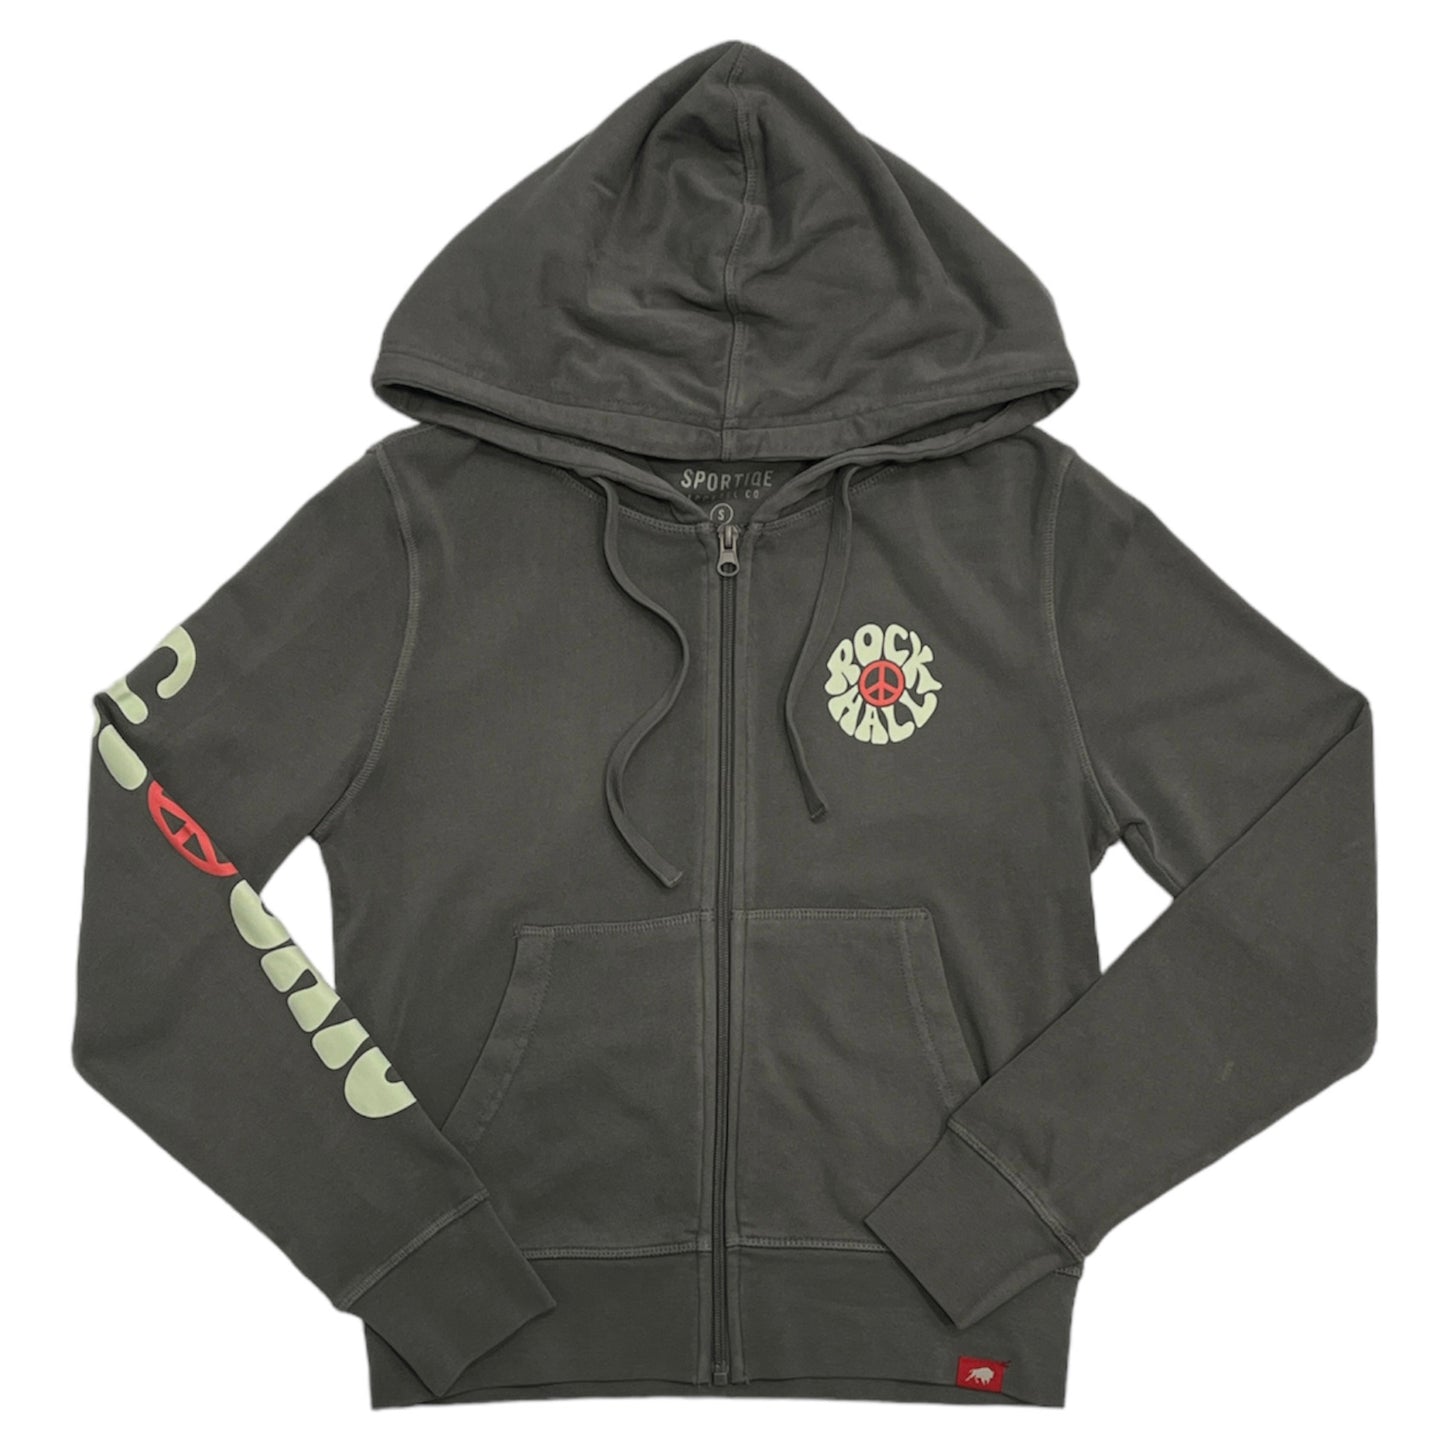 ROCK HALL FITTED CLEVELAND PEACE SIGN FRENCH TERRY ZIP UP HOODIE